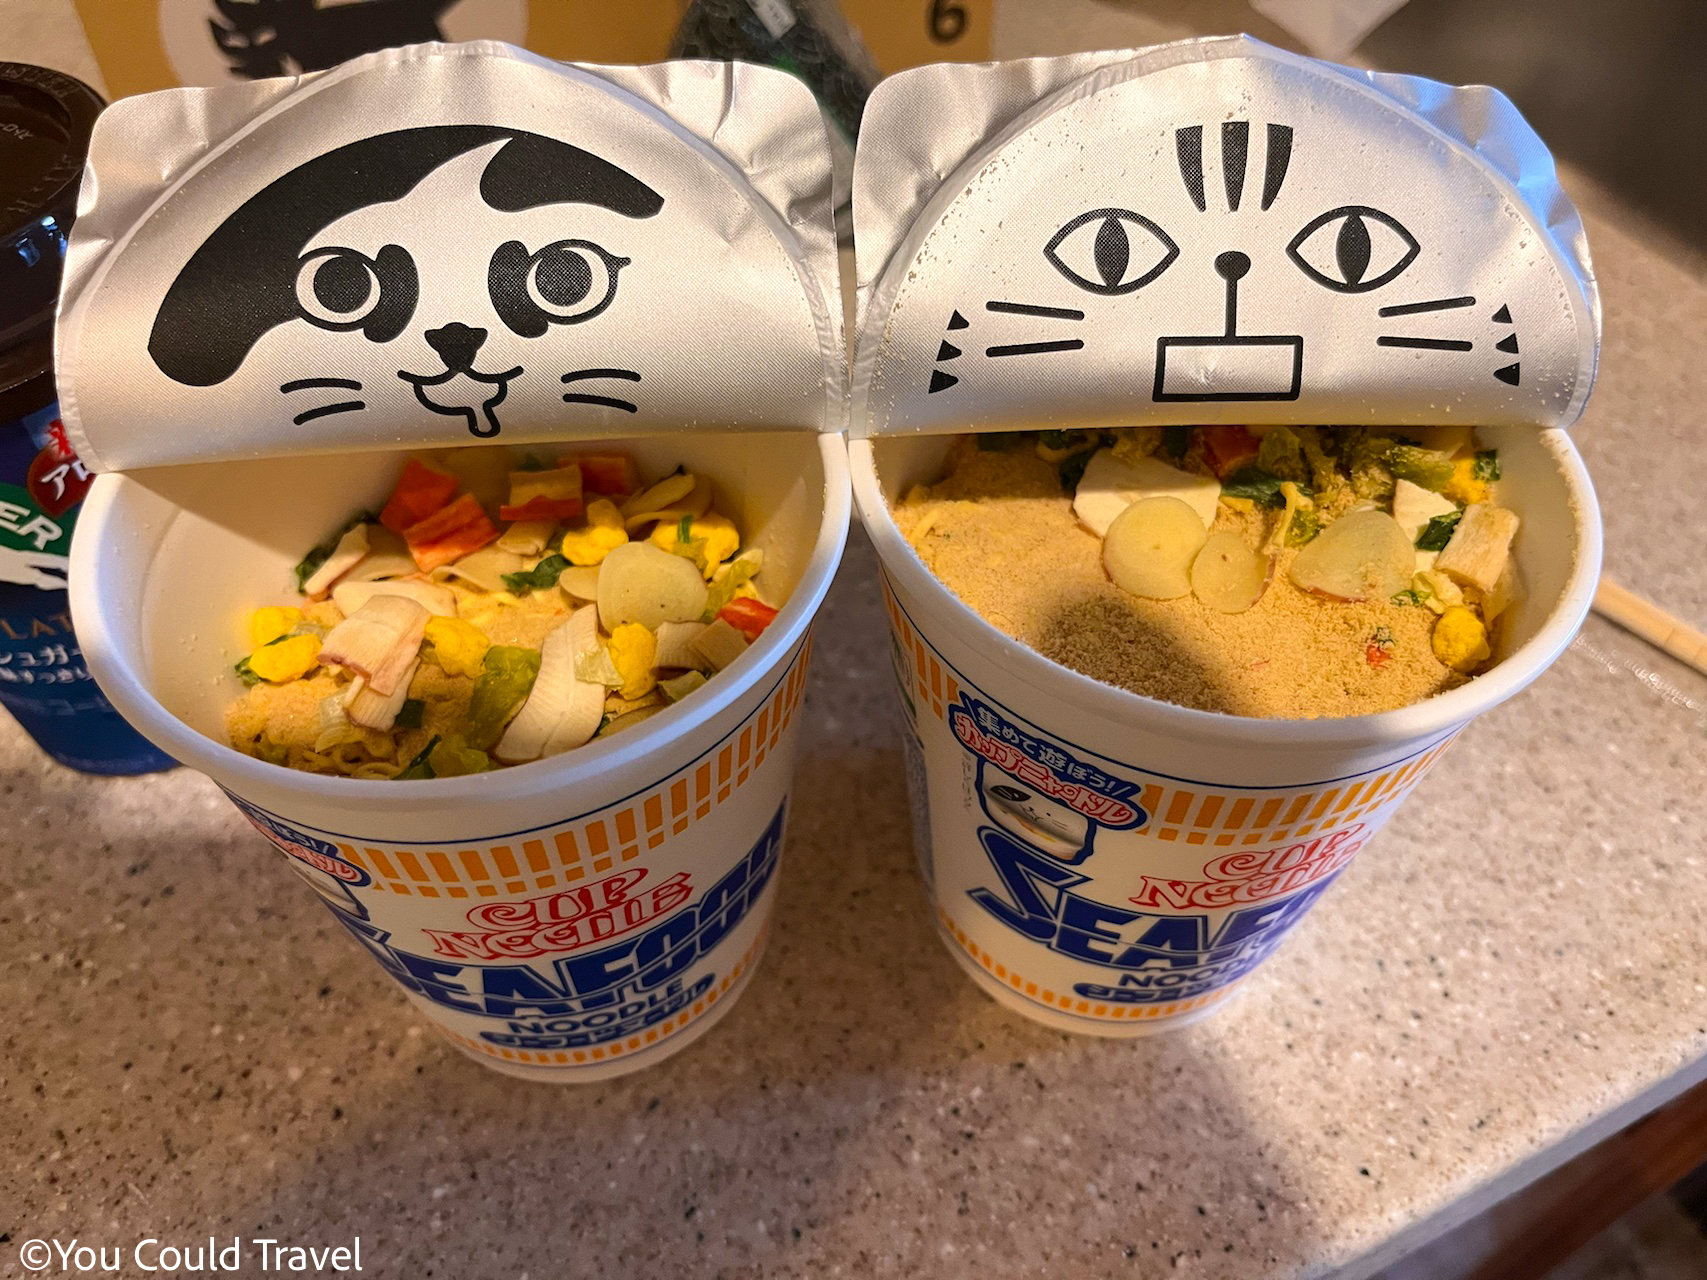 Cup noodle with seafood flavour and cute cats on the lid